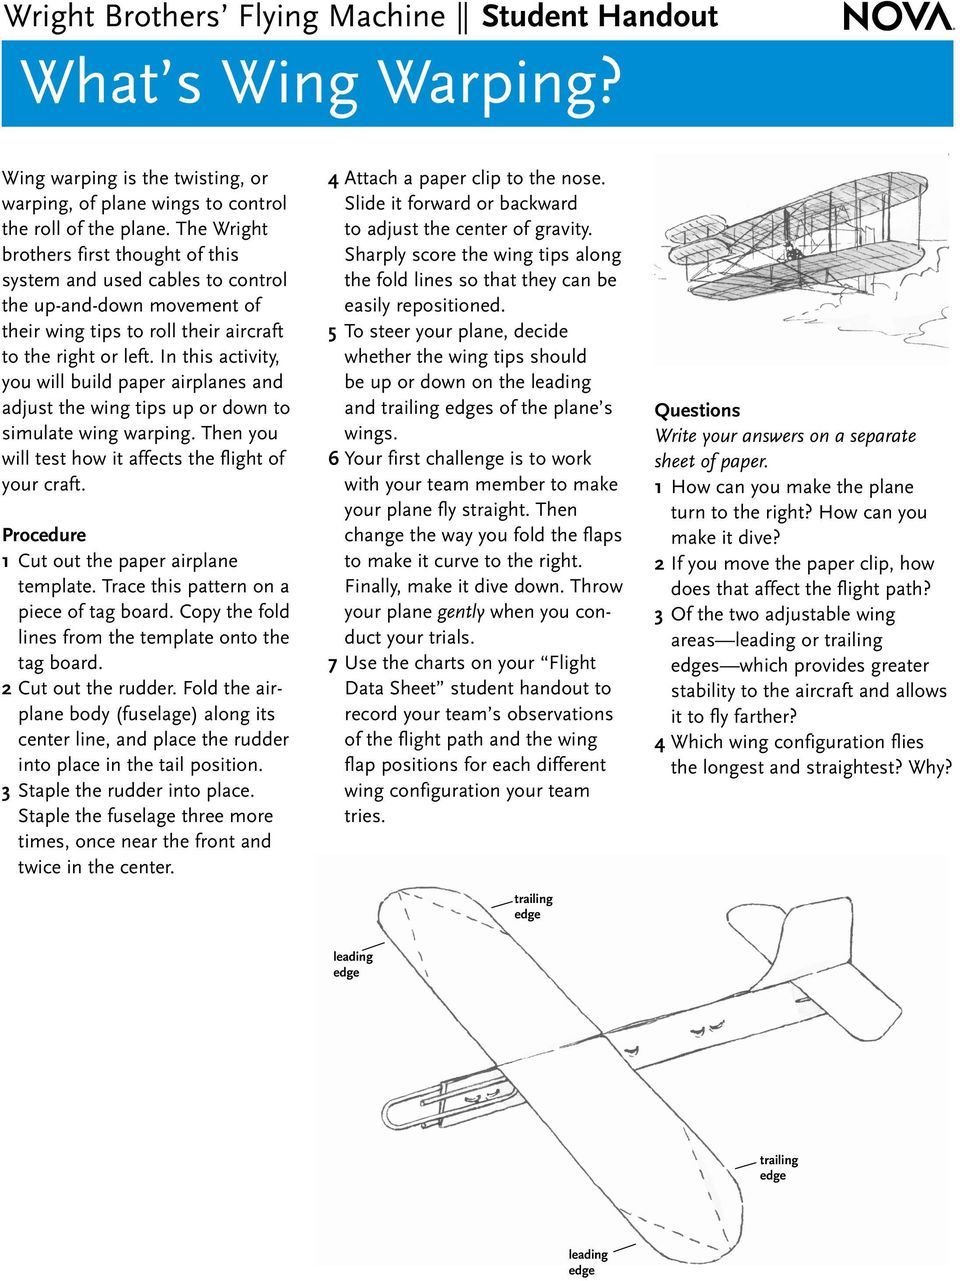 In this activity, you will build paper airplanes and adjust the wing tips or to simulate wing warping. Then you will test how it affects the flight of your craft.